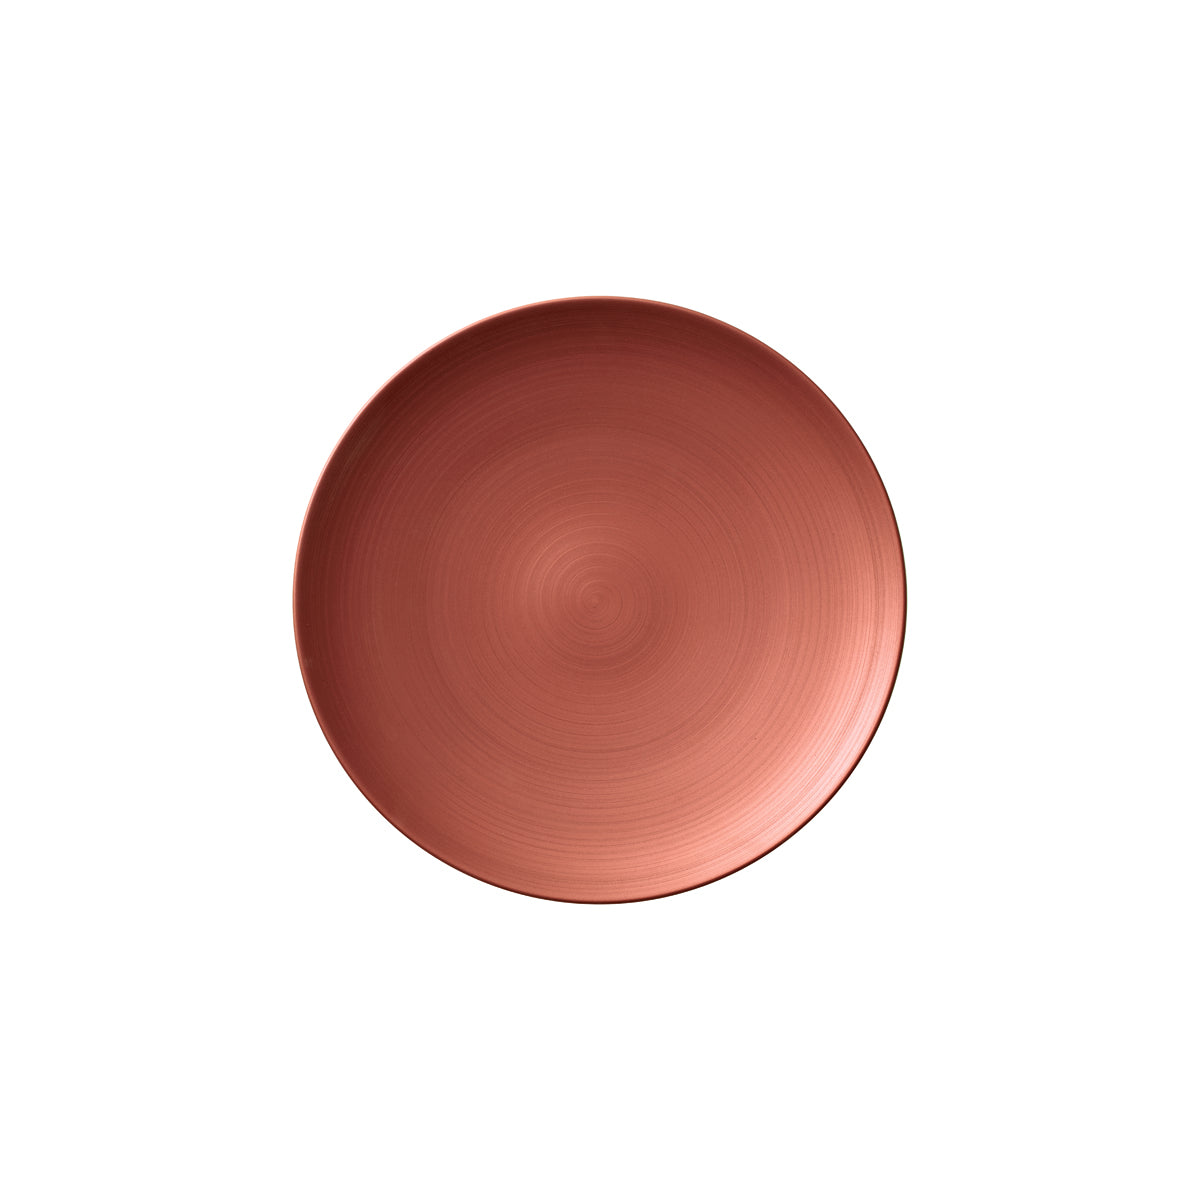 VB16-4070-2621 Villeroy And Boch Villeroy And Boch Copper Glow Coupe Plate 290mm Tomkin Australia Hospitality Supplies